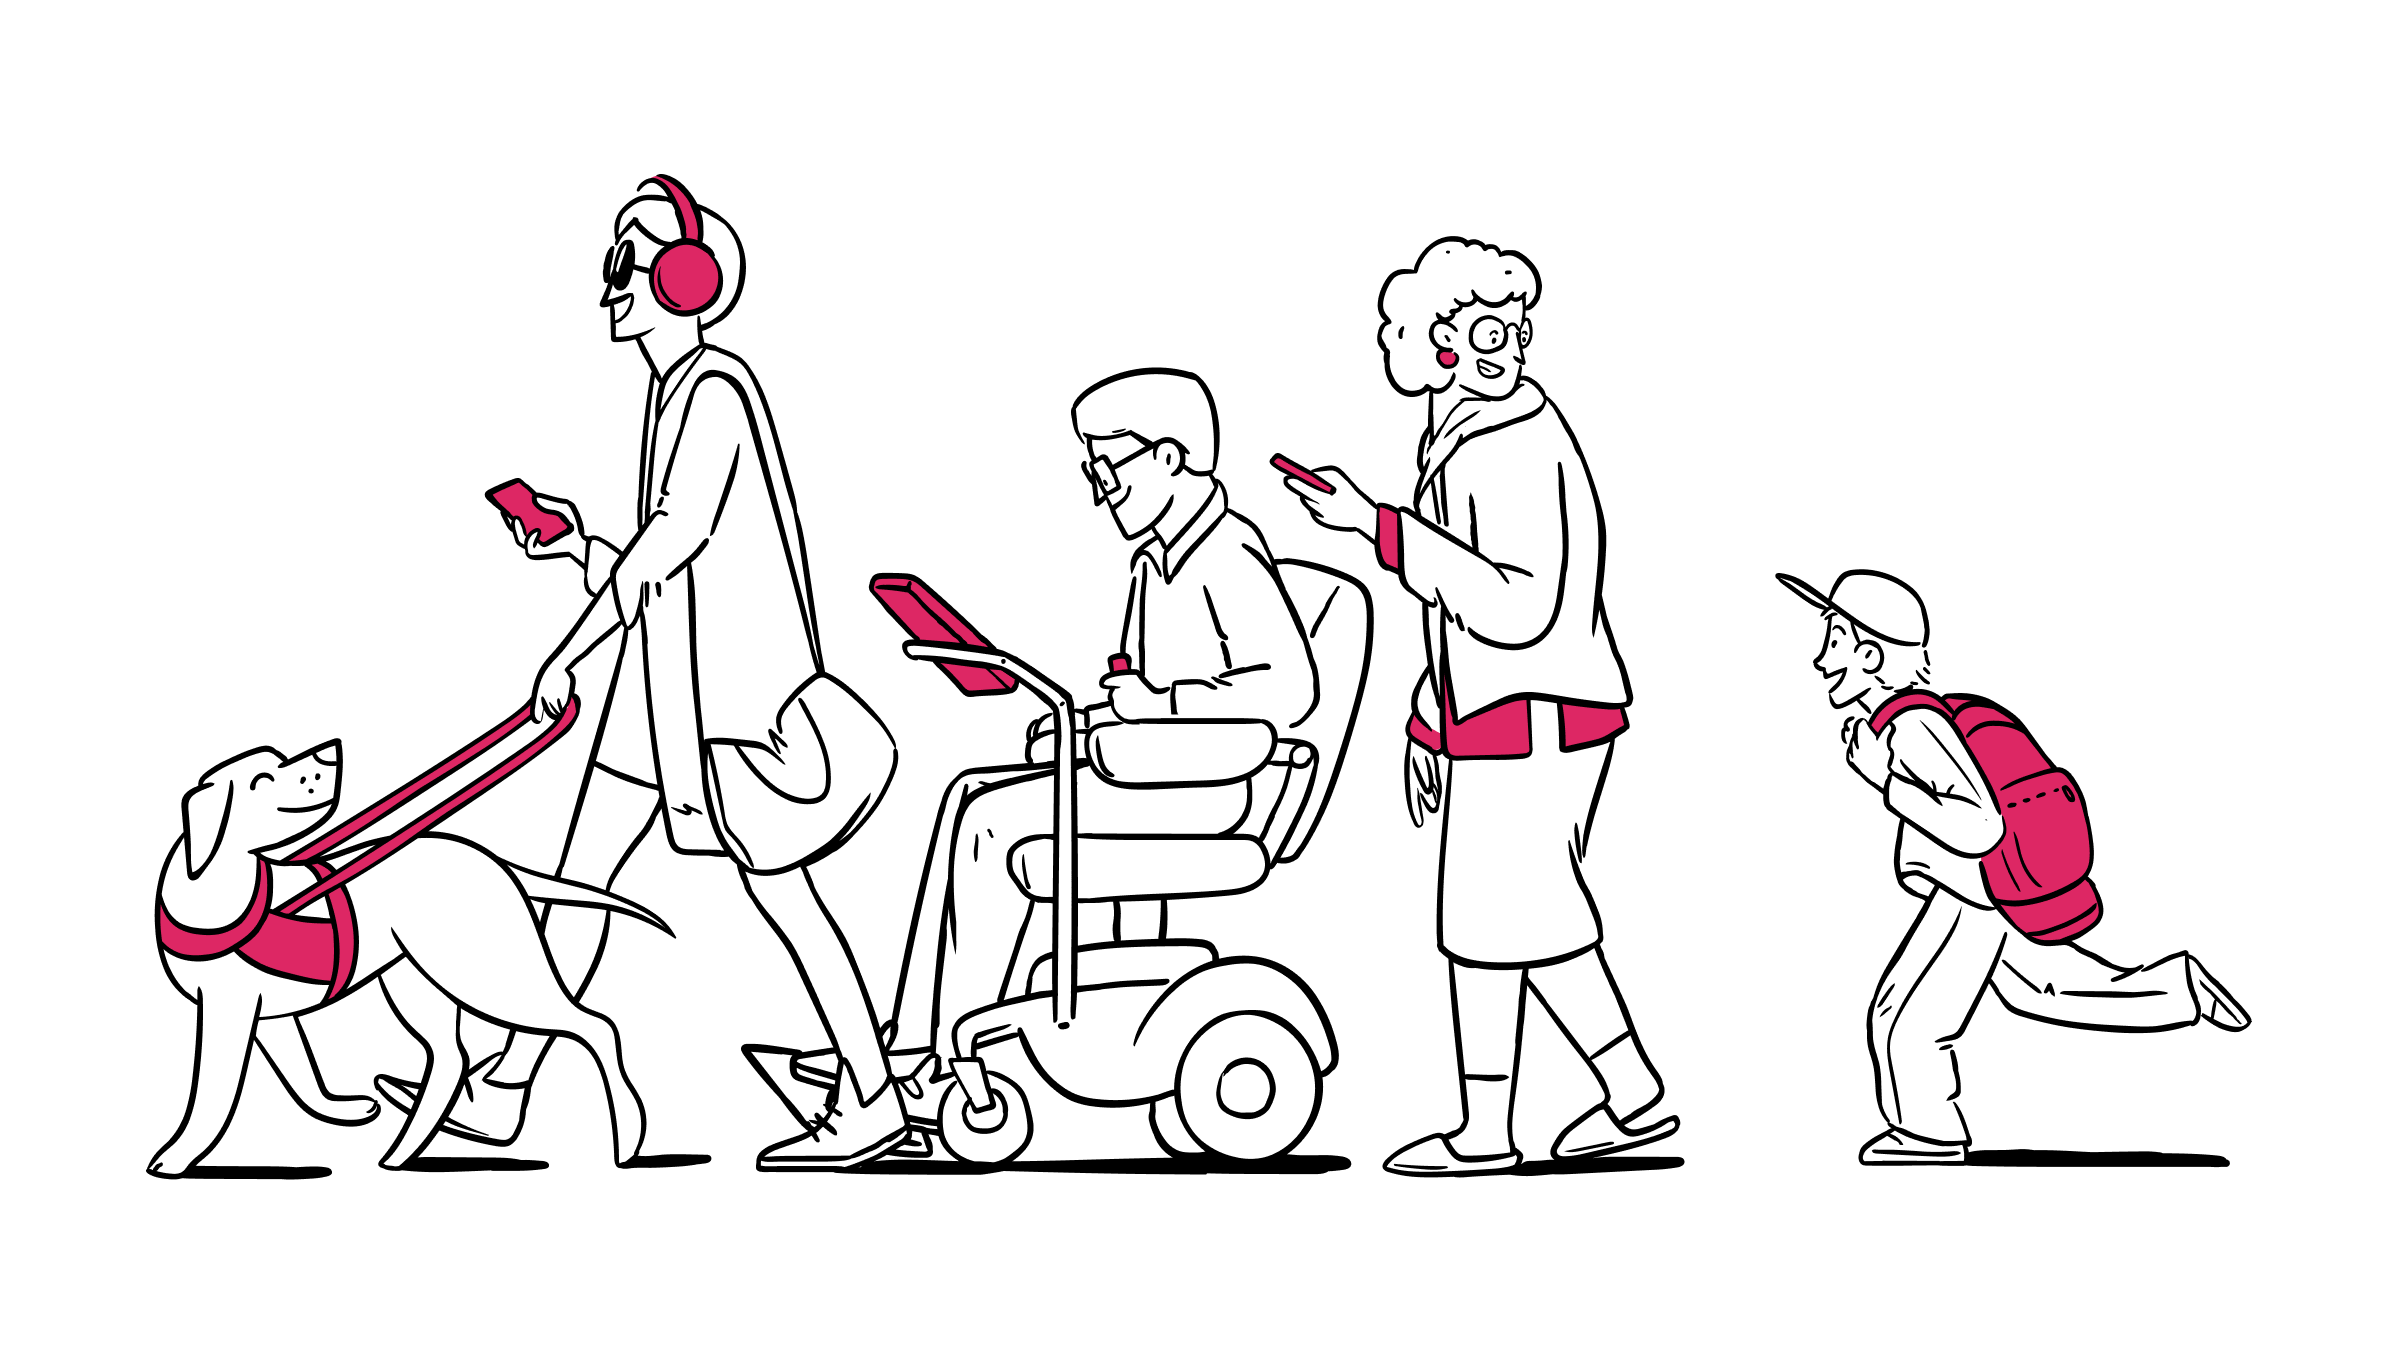 Illustration of person with guide dog, one in a wheelchair, a senior person who looks behind to see a child running